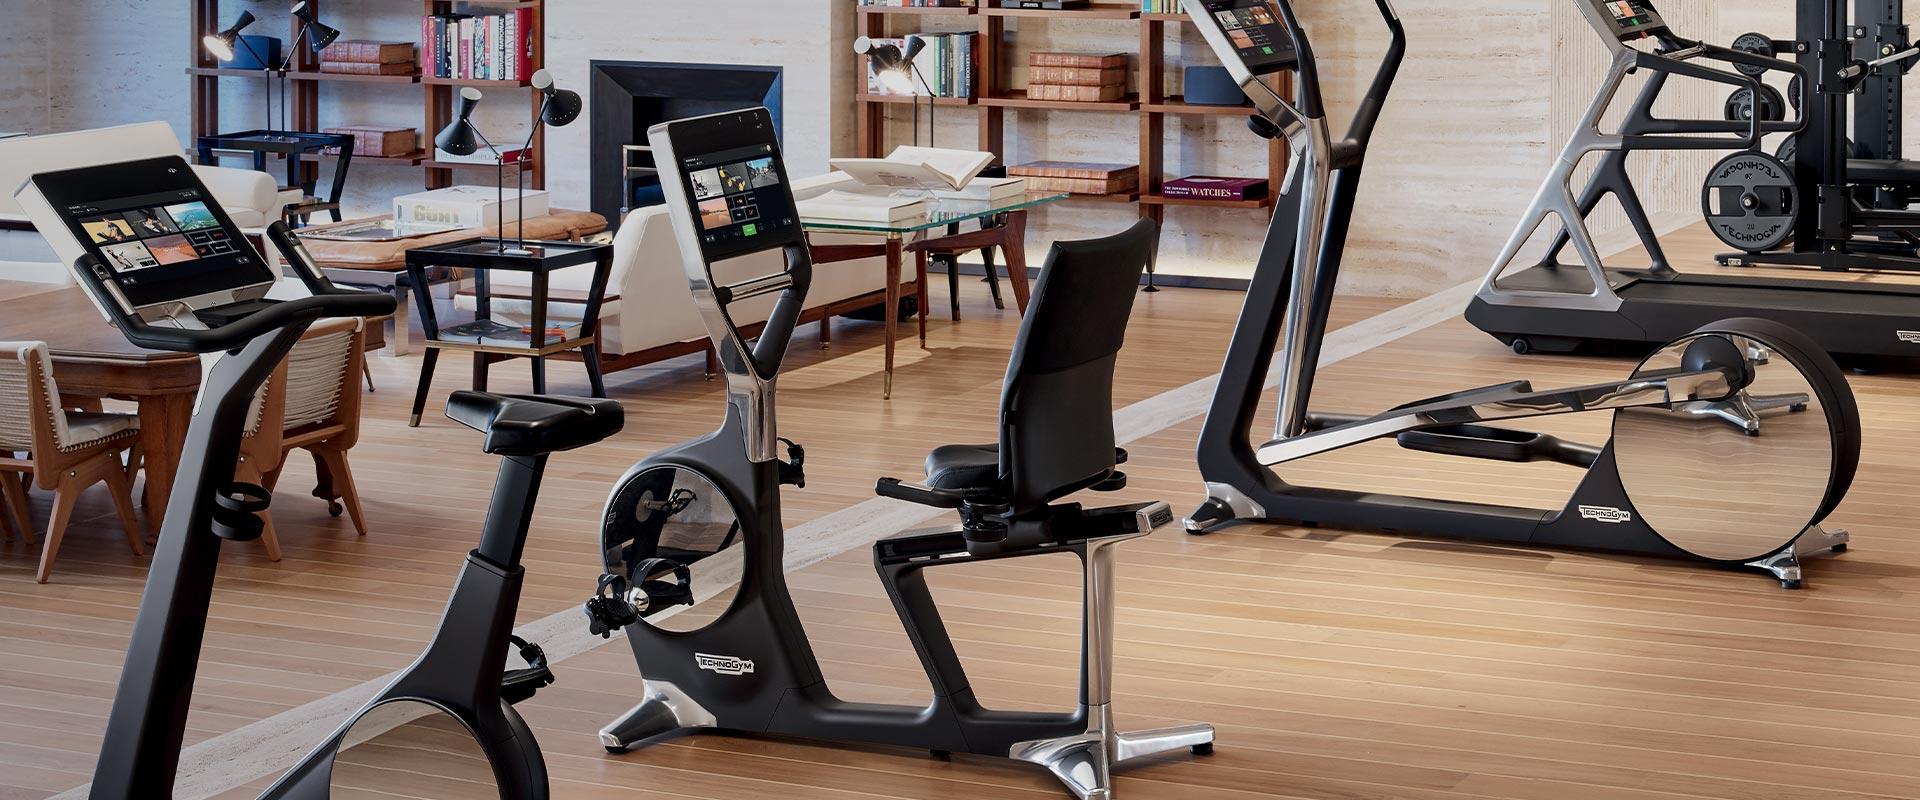 Wellness Holding offers a maximum of 14,000,000 ordinary shares of Technogym Spa through an accelerated bookbuilding procedure reserved to institutional investors